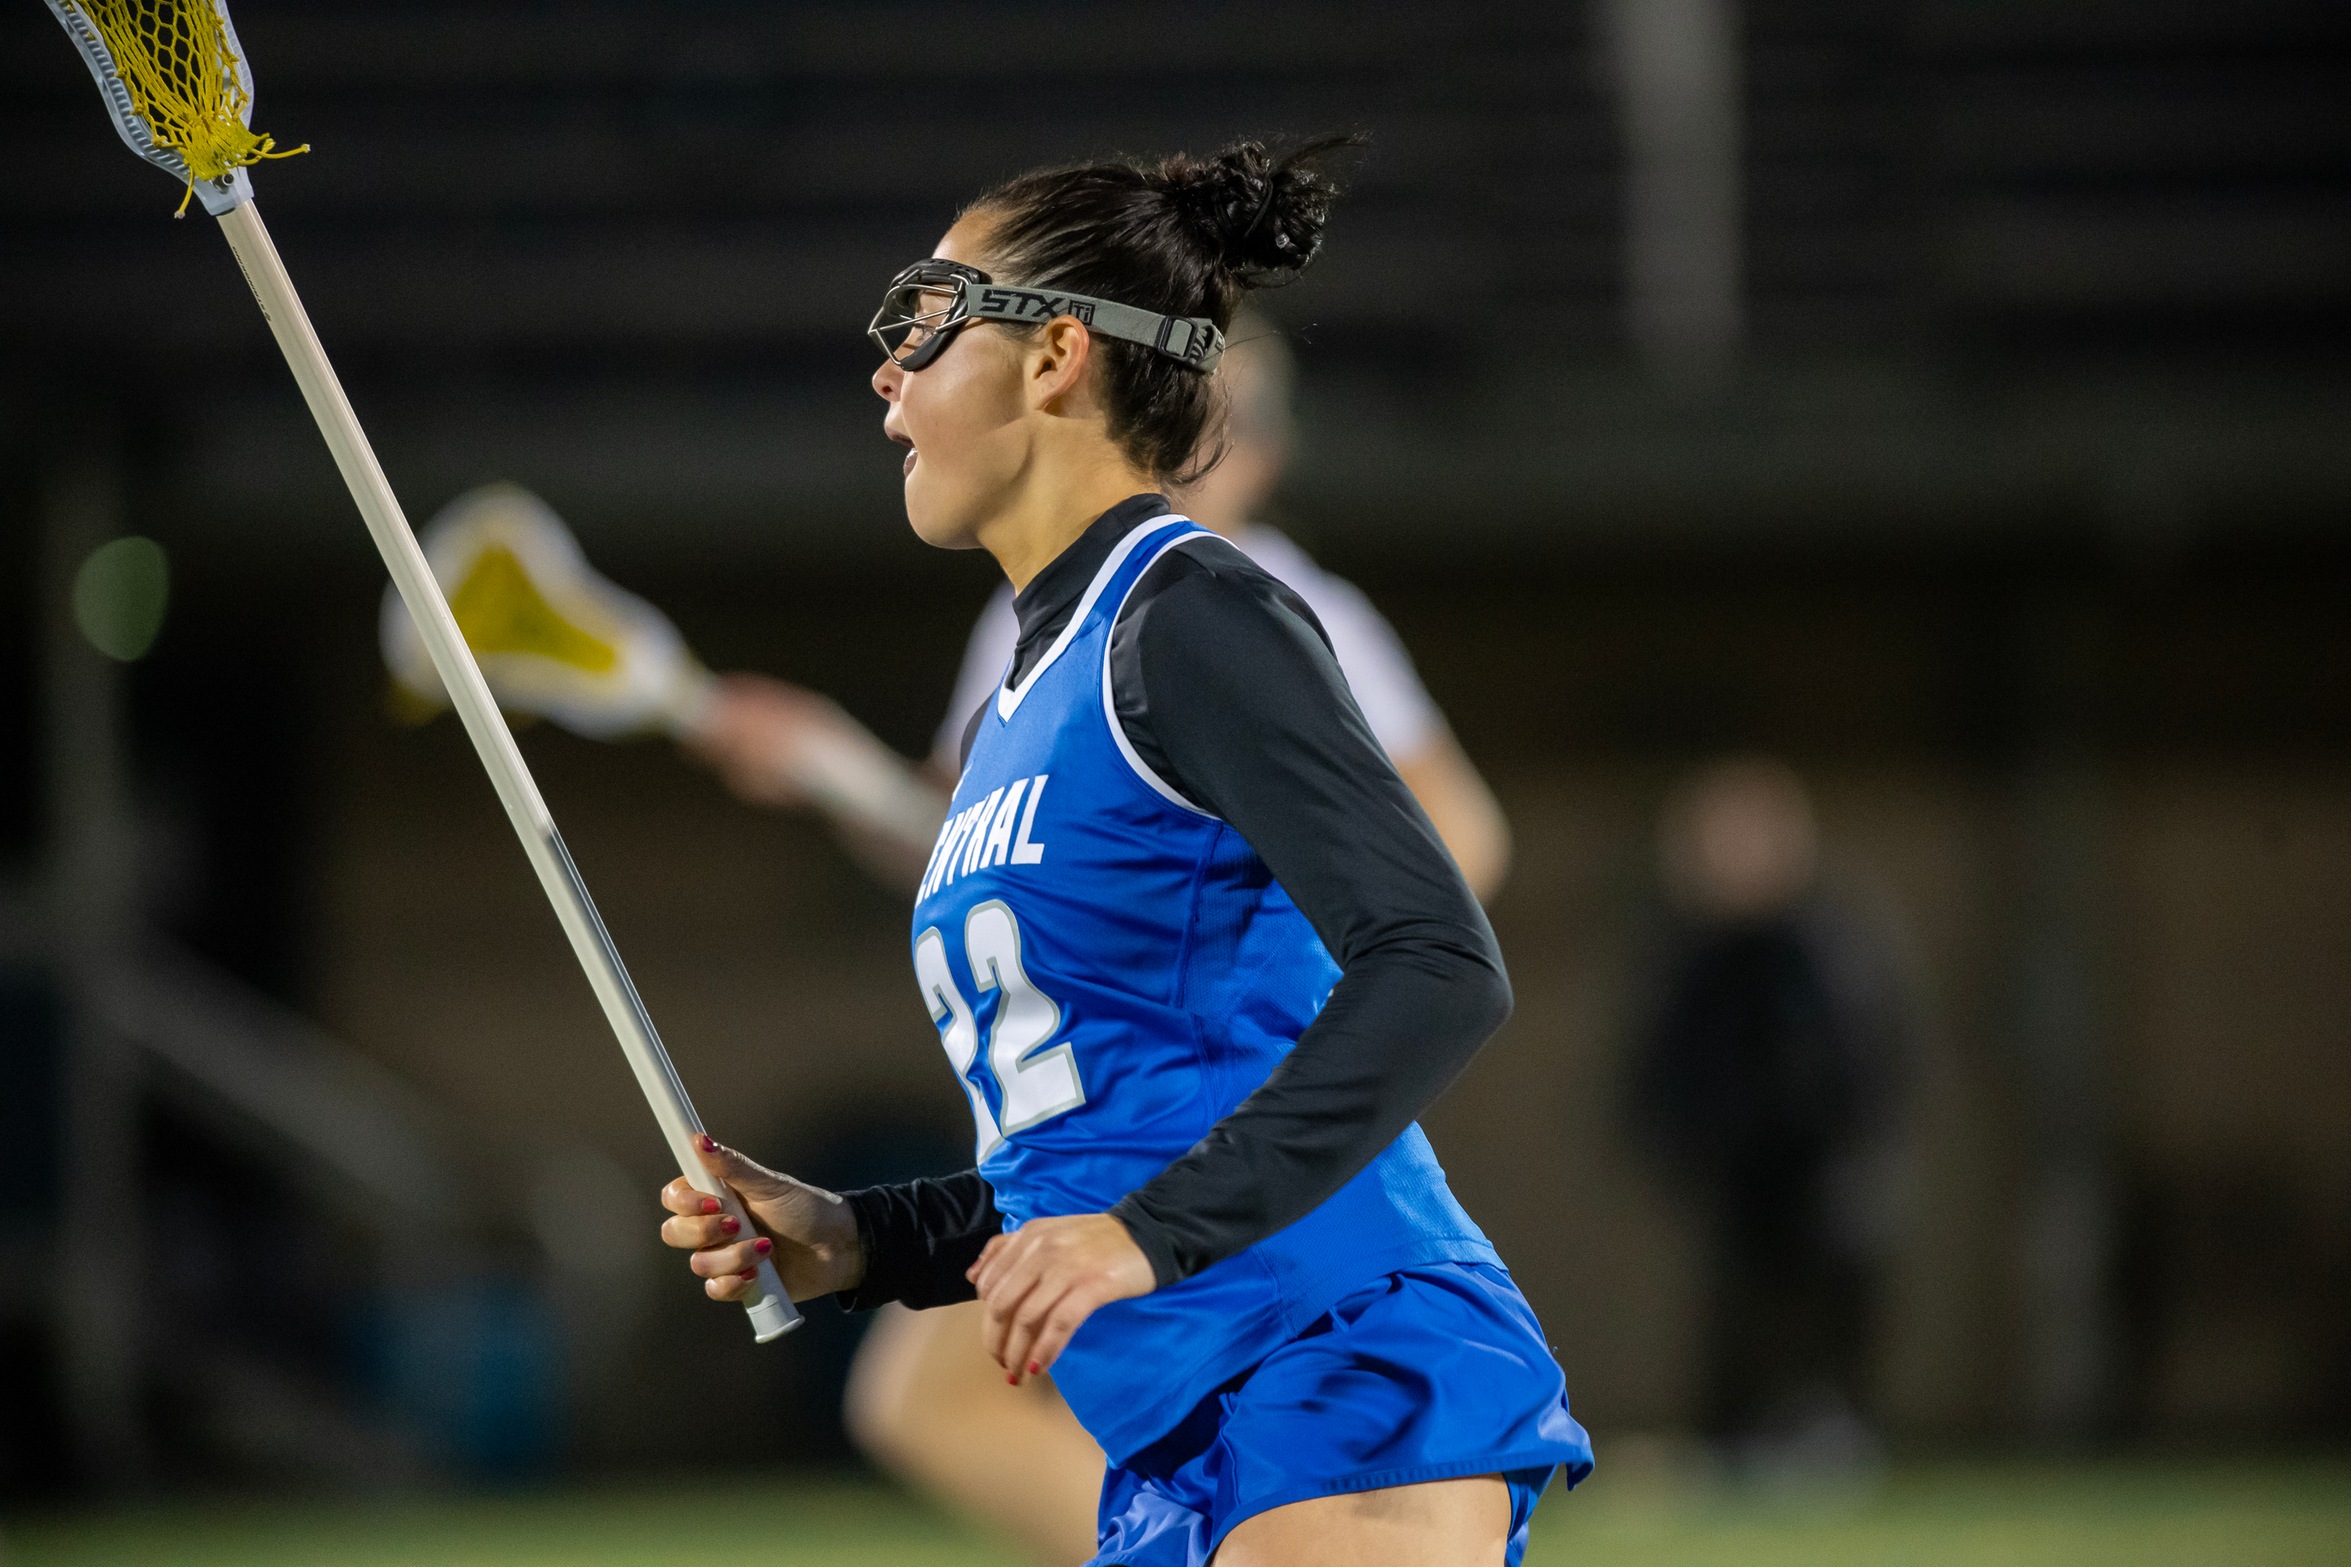 Lauren Valluzzi tallied nine points, on five goals and four assists (all career-highs) to lead the Blue Devils over FDU on Saturday, April 8, 2023. (Photo: Steve McLaughlin)